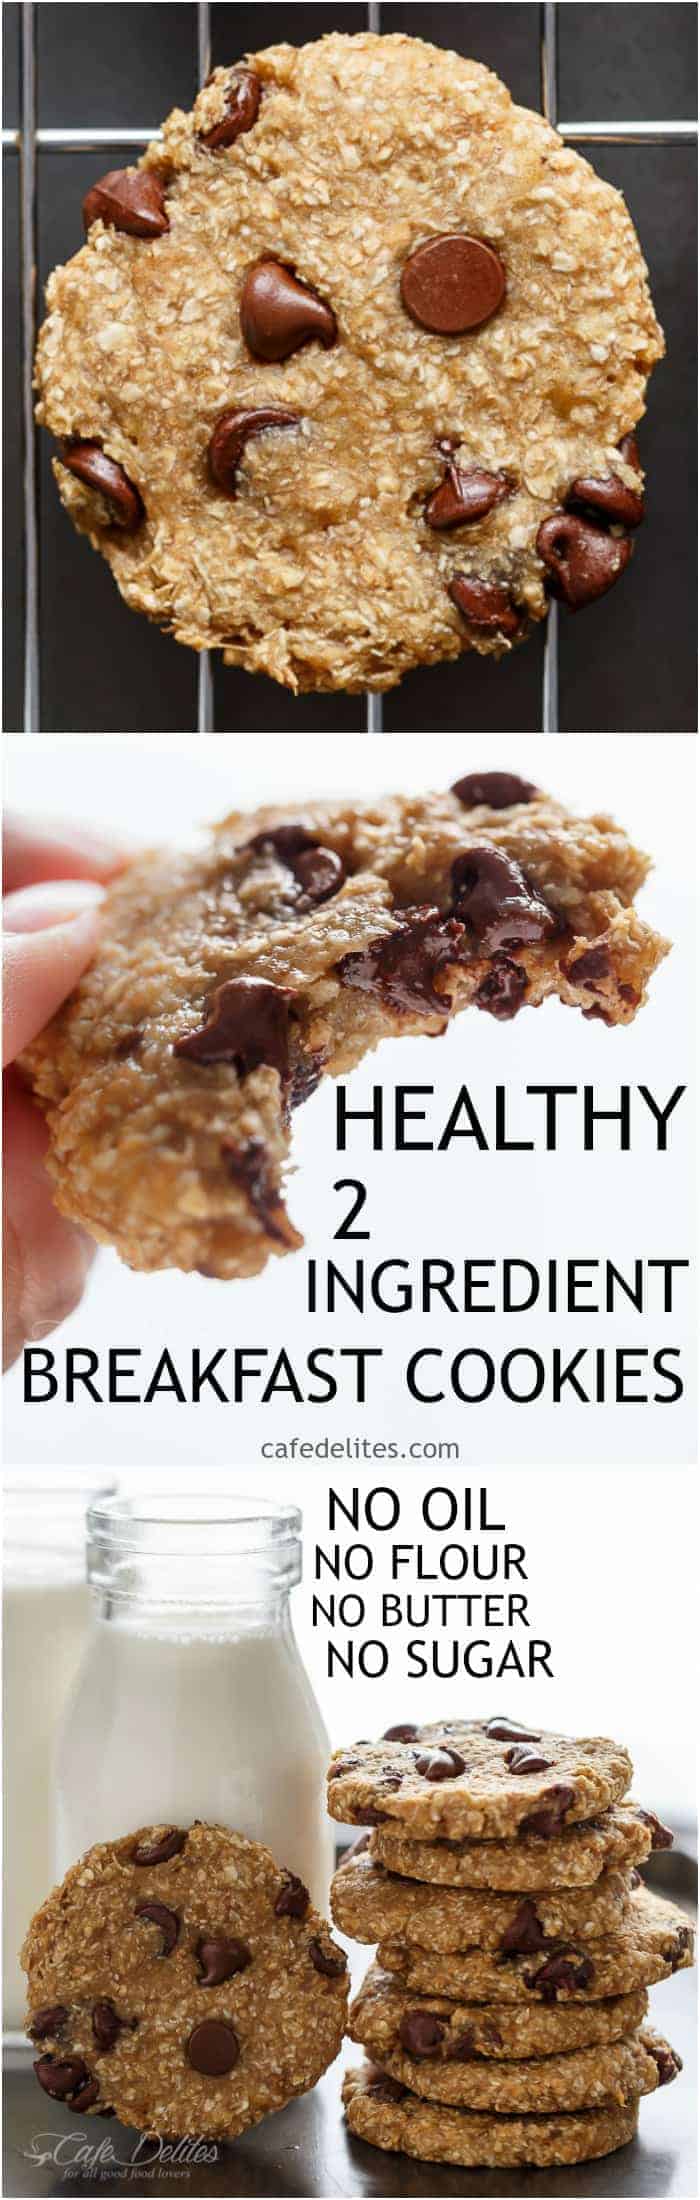 No flour. No oil. No refined sugars, Non fat. Weight Watchers friendly. Low calorie! These Healthy 2-Ingredient Breakfast Cookies are super easy to make! | https://cafedelites.com